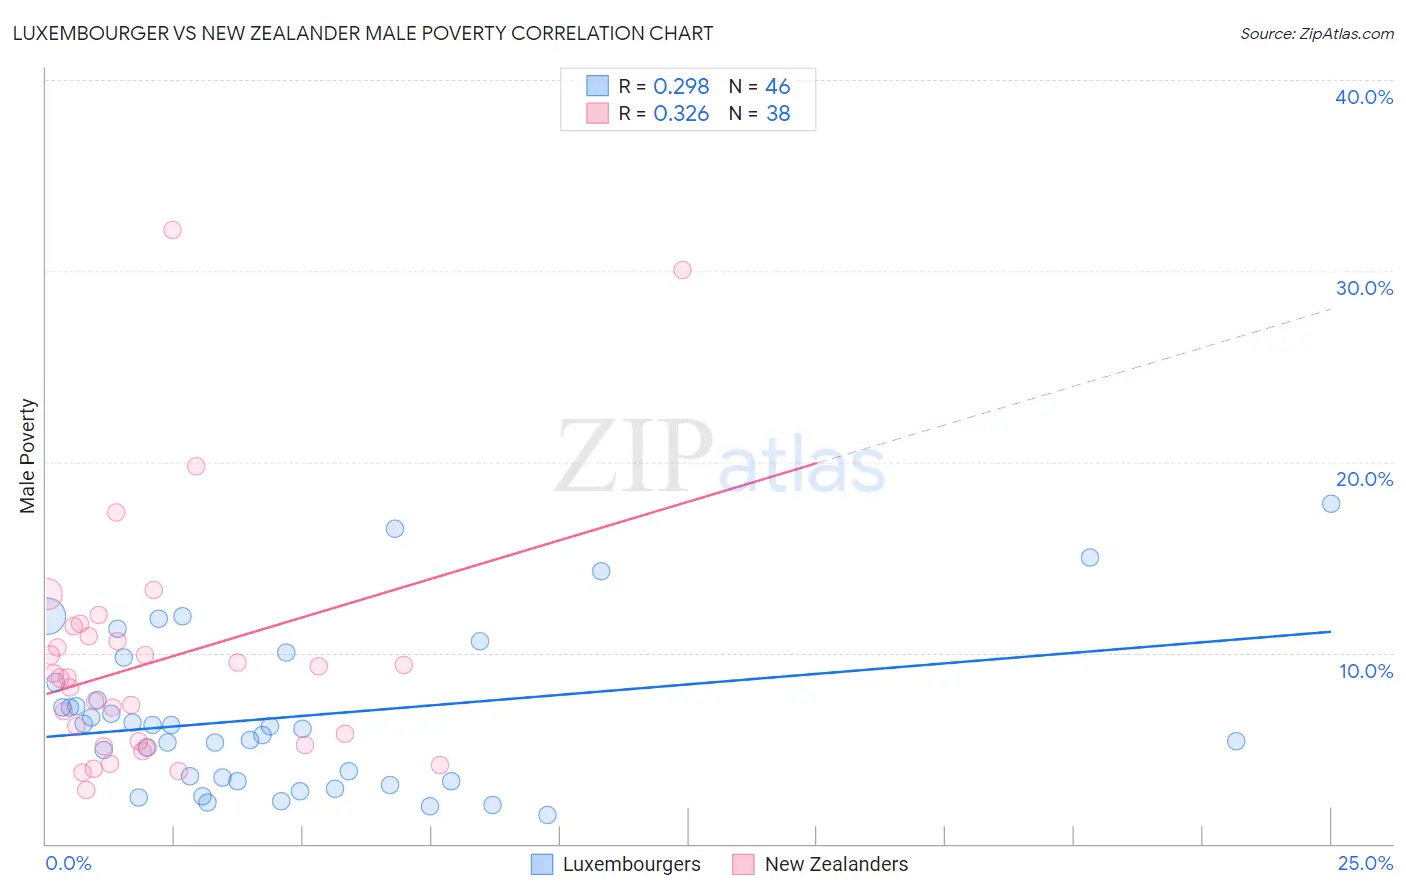 Luxembourger vs New Zealander Male Poverty